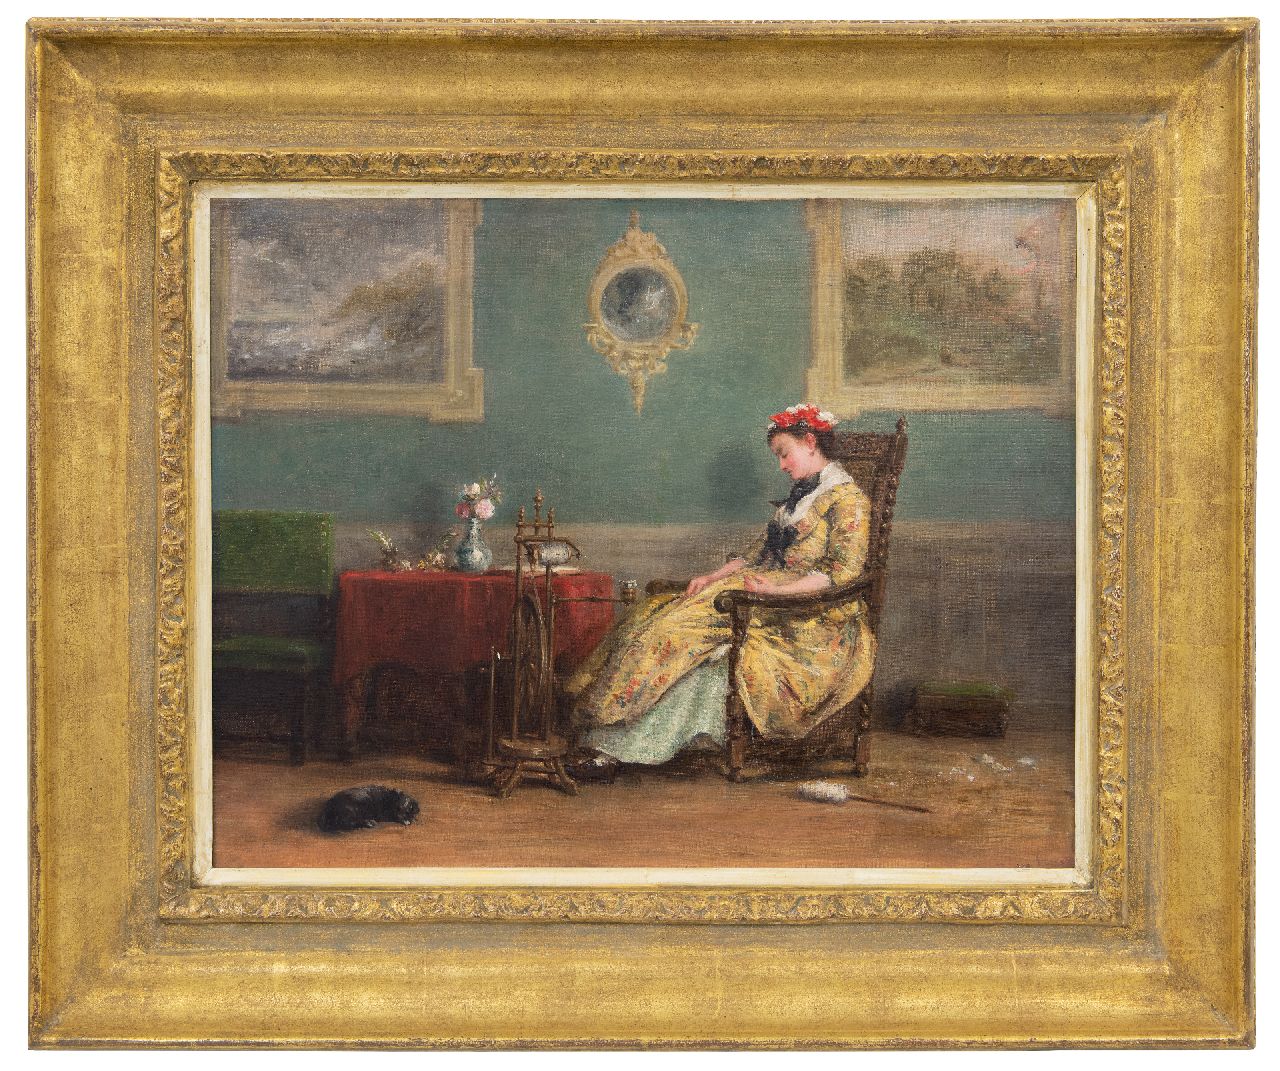 Bles D.J.  | David Joseph Bles | Paintings offered for sale | Le Repos, oil on canvas 35.6 x 46.0 cm, signed l.r. (vague) and dated 1846